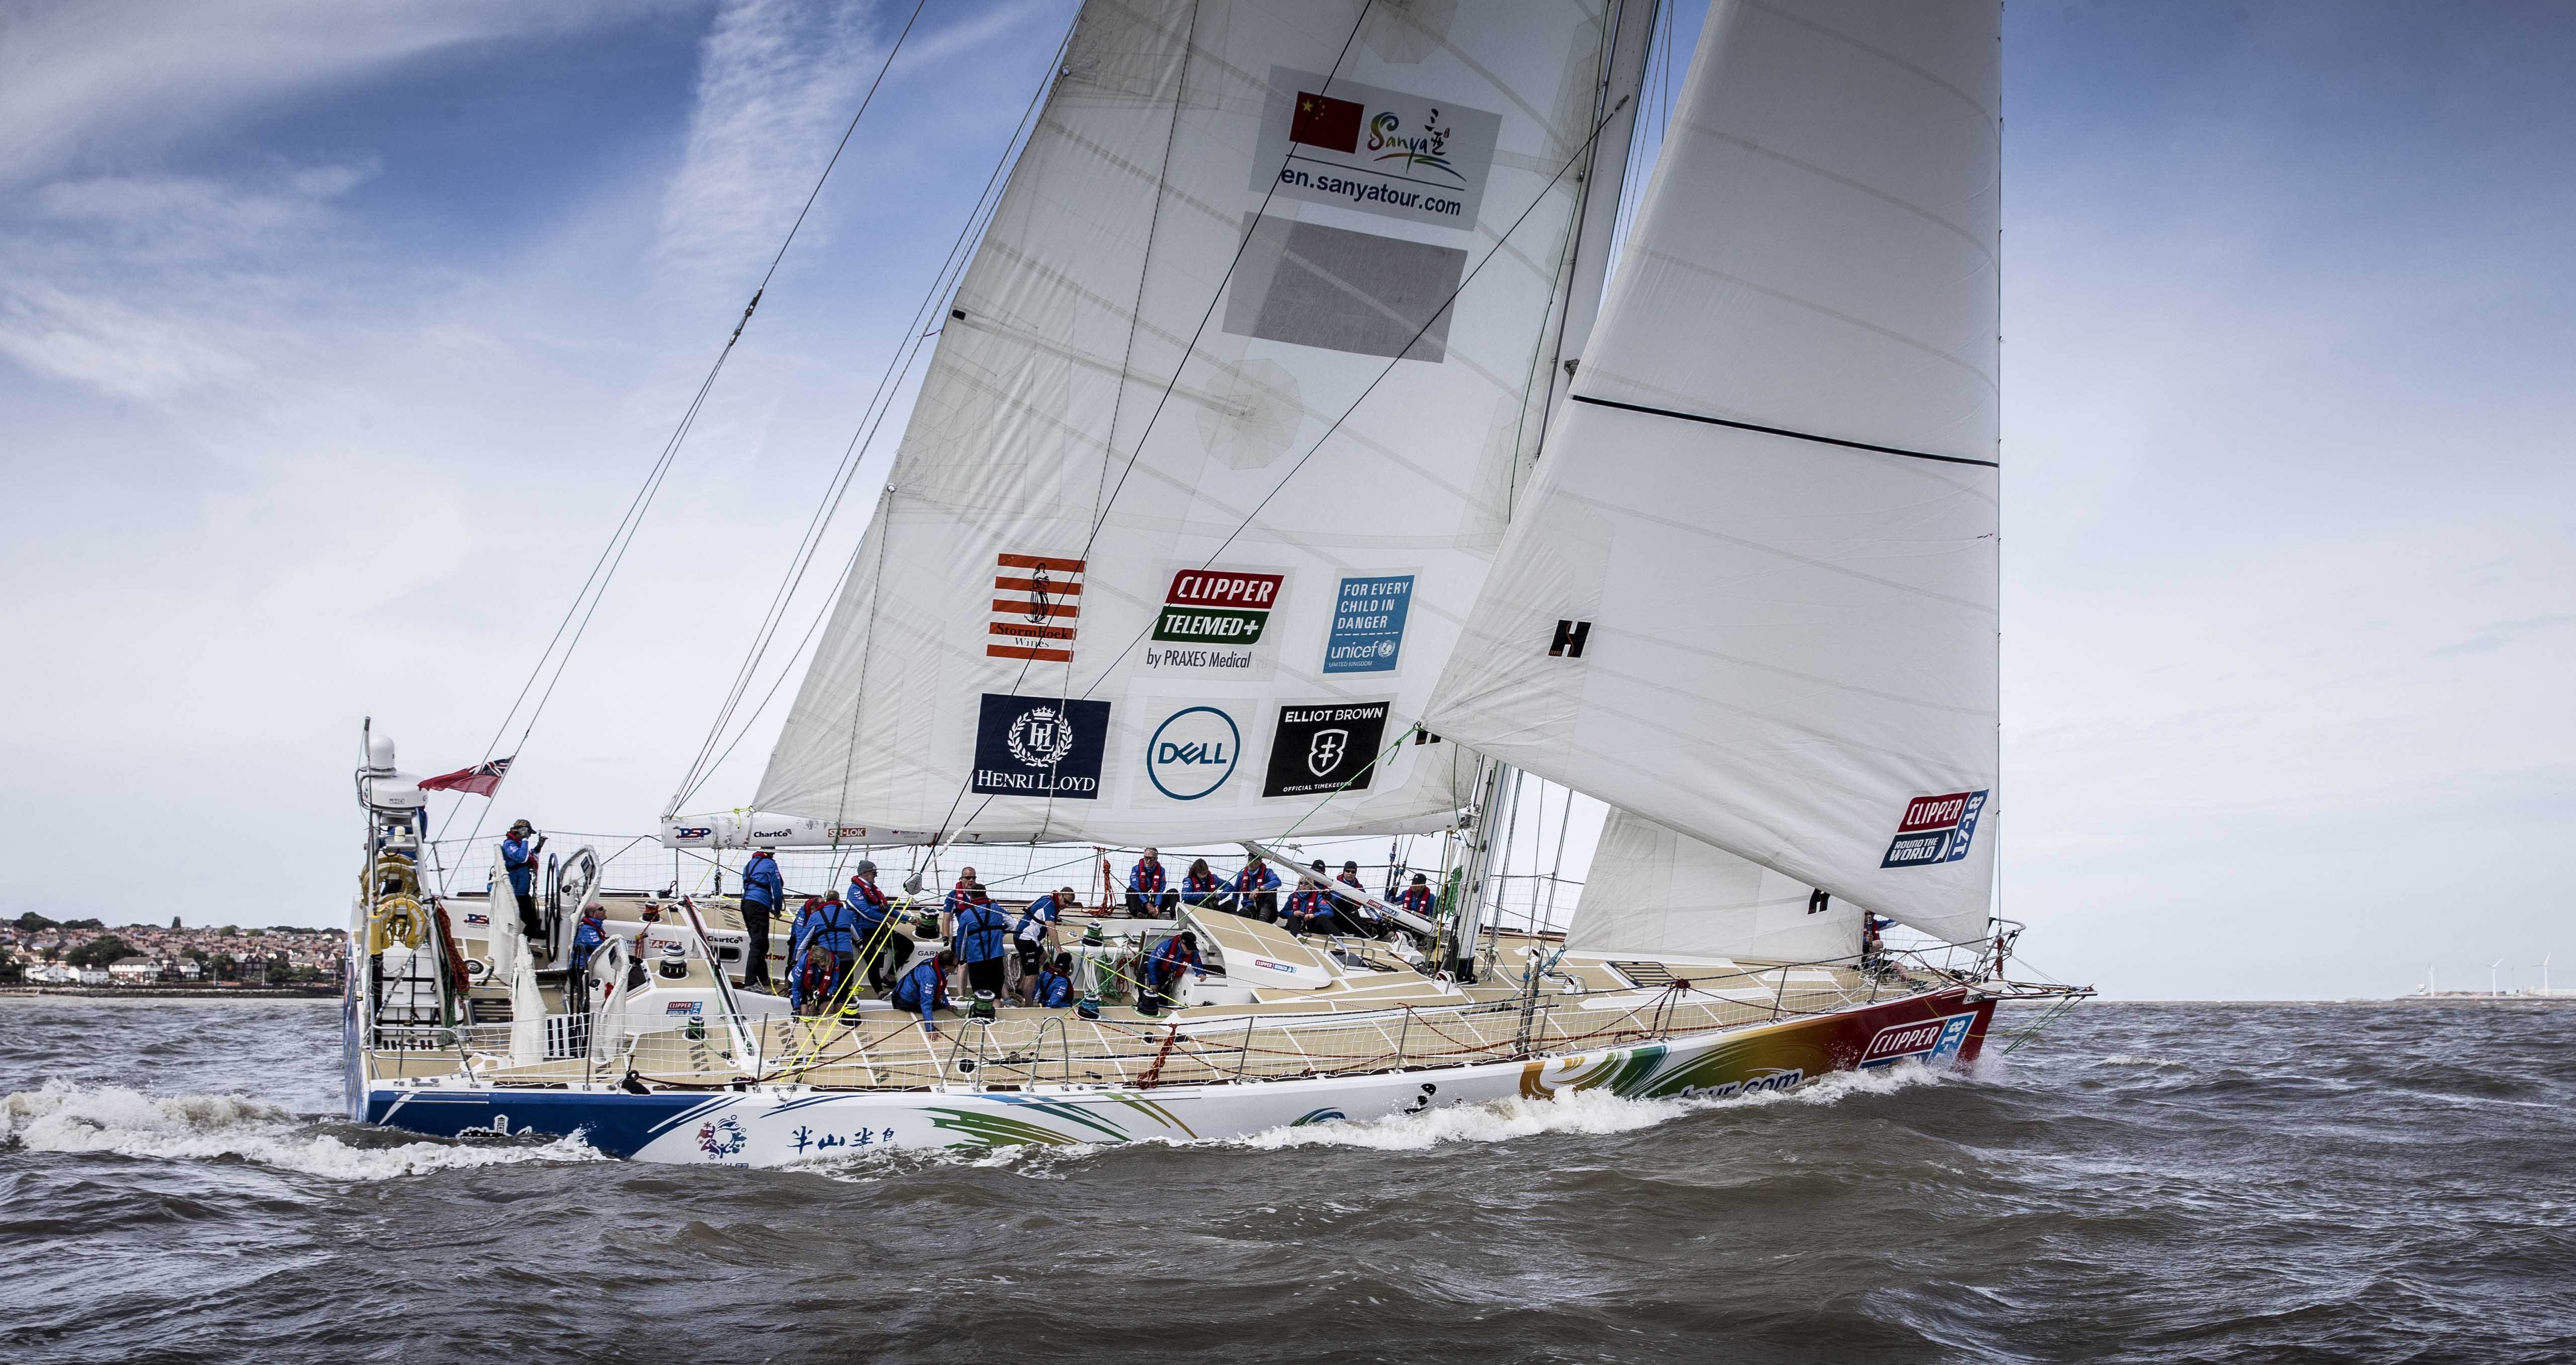 Aussies set sail in biggest round-the-world yacht race